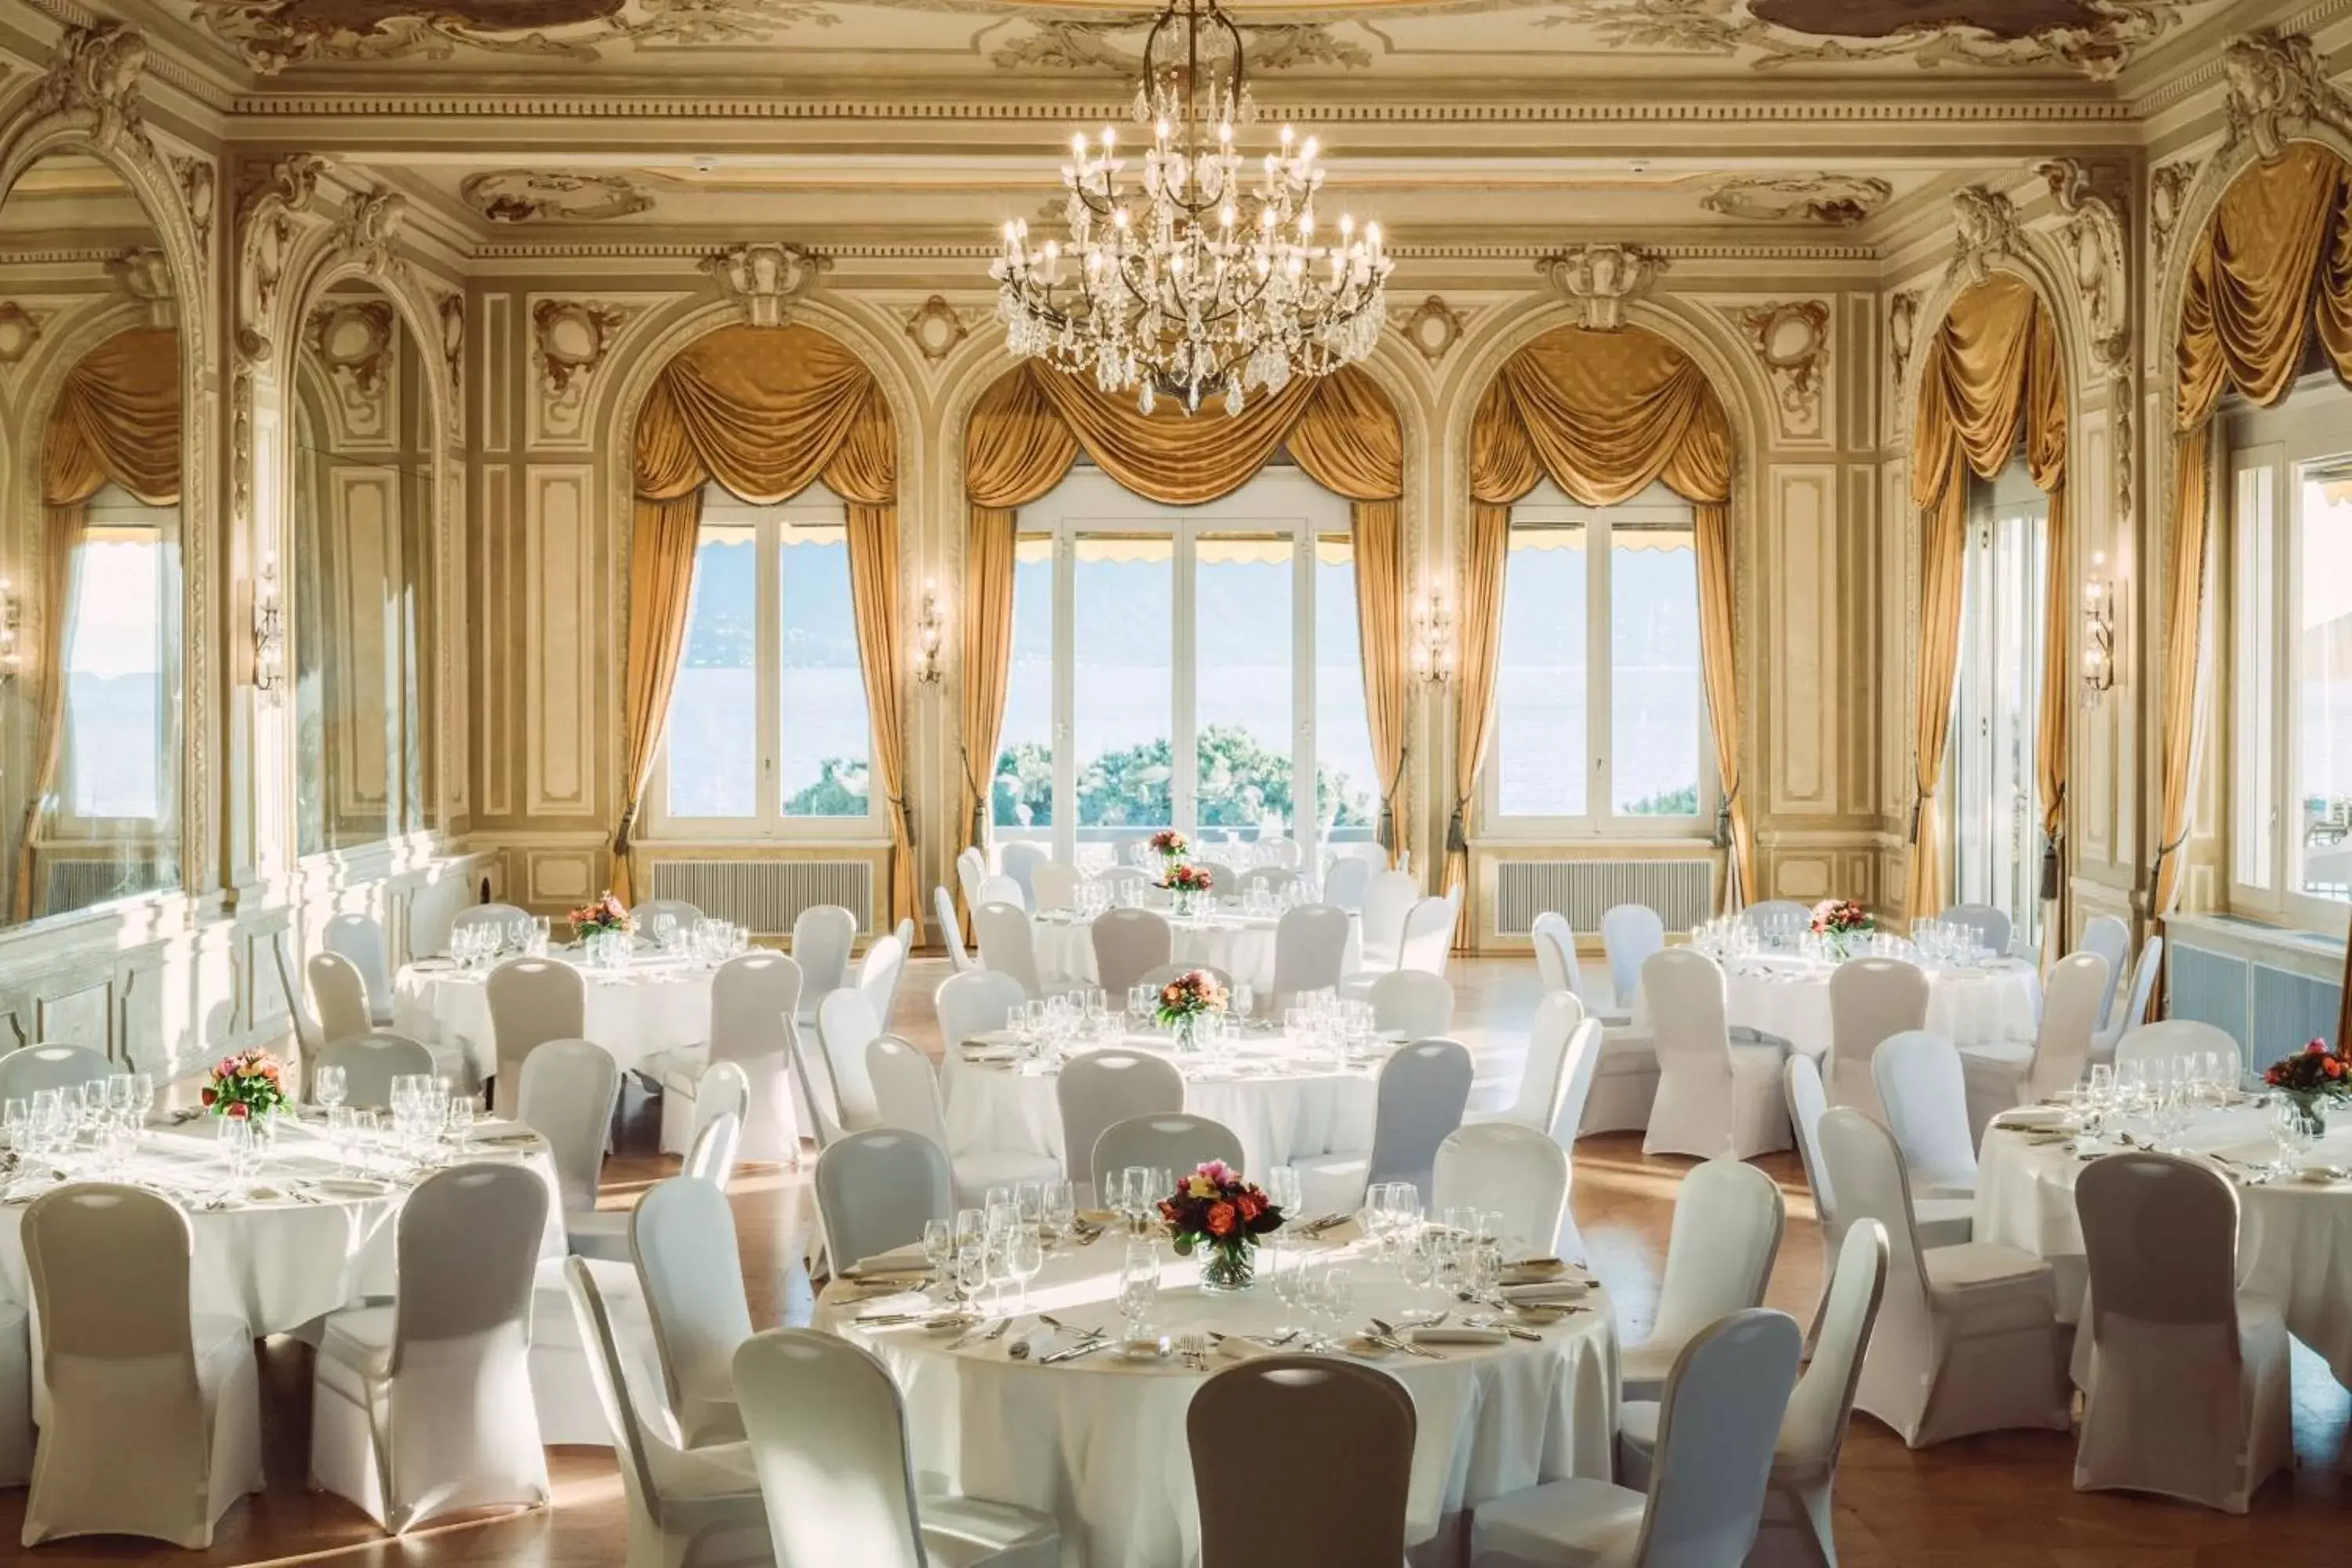 Meeting/conference room, Banquet Facilities in Grand Hotel Suisse Majestic, Autograph Collection